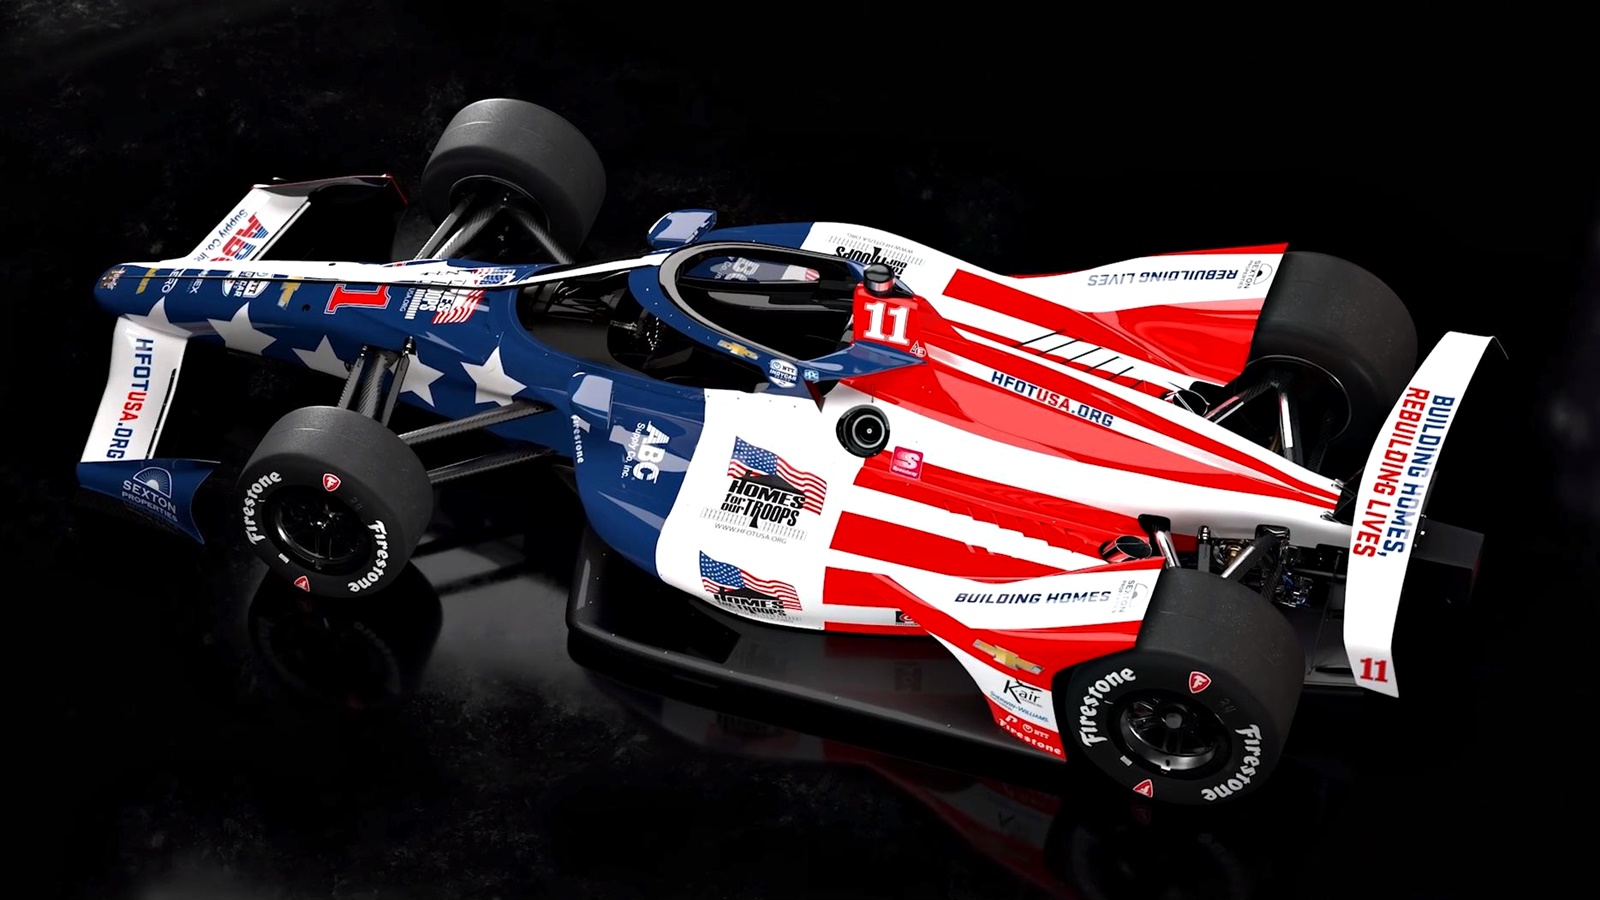 Hildebrand To Run Flag Themed Livery For Indy 500